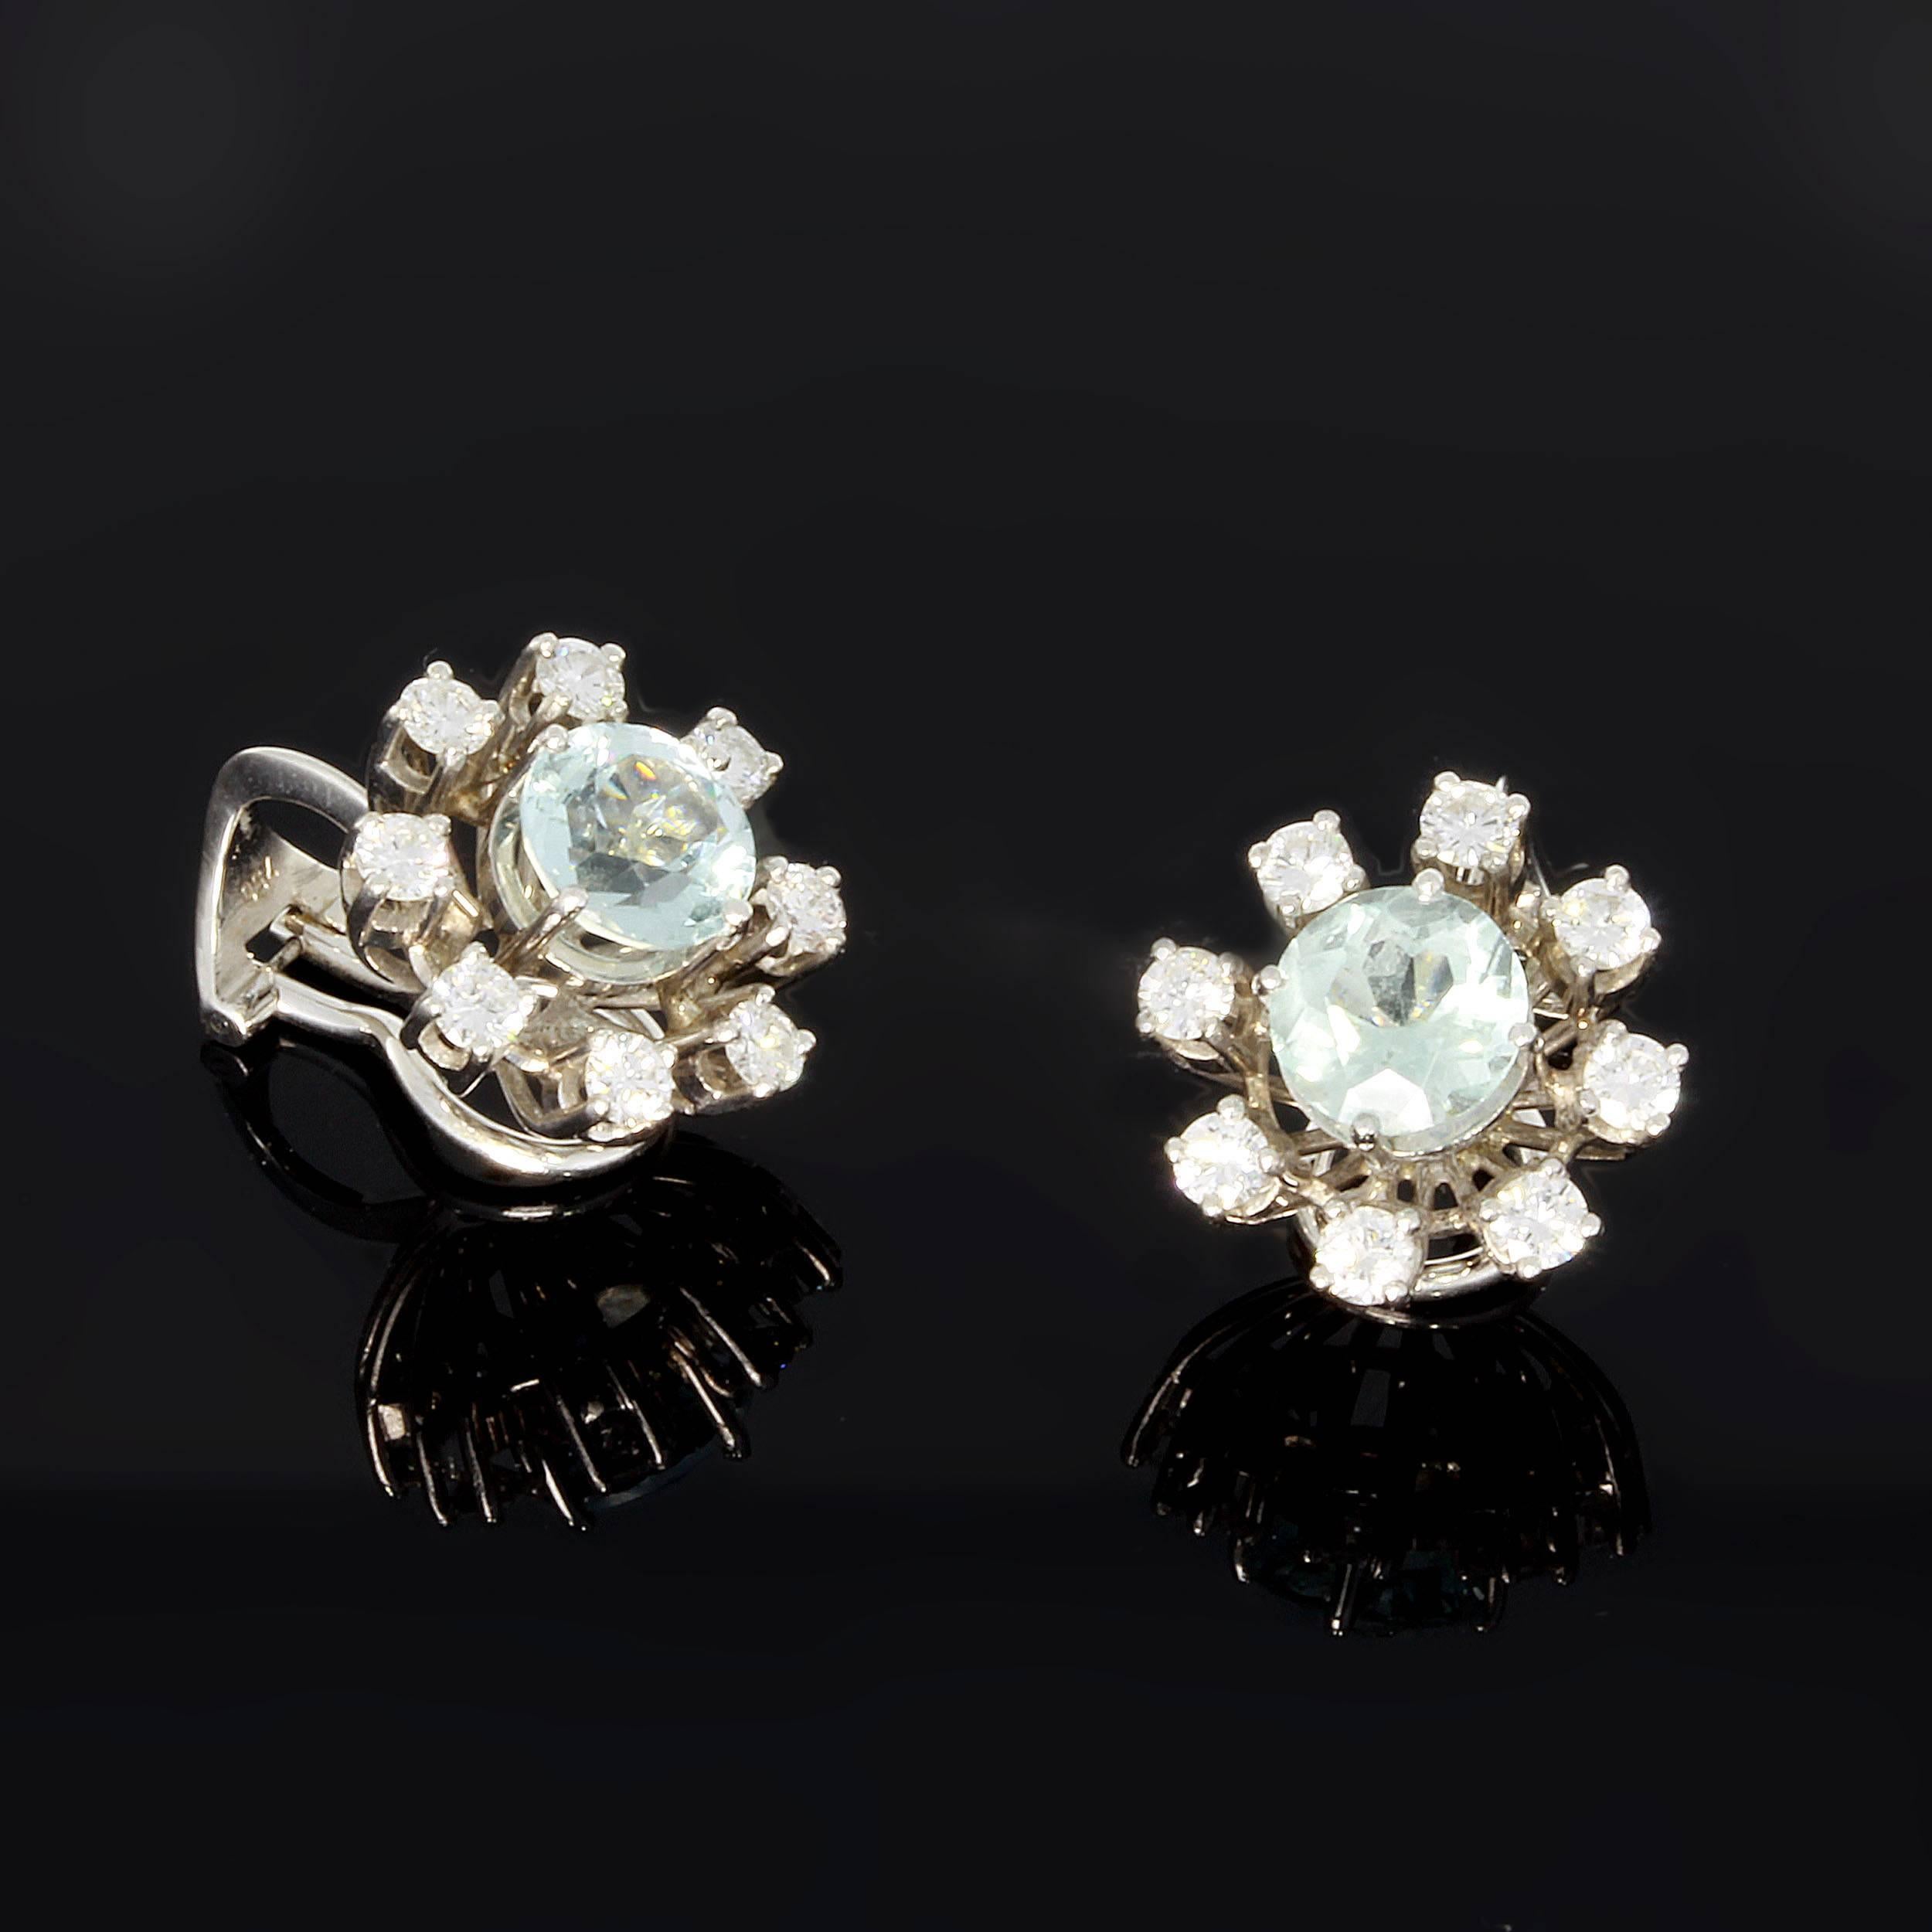 Flower shape set with 2 circular aquamarine, surrounded by 16 brilliant-cut diamonds weighing approximately 1,25 cts. Mounted in 18 carat white gold.
Total weight: 7,74 g. Diameter: 0.67 in ( 1,7 cm ), depth: ca. 0.39 in ( ca. 1 cm )